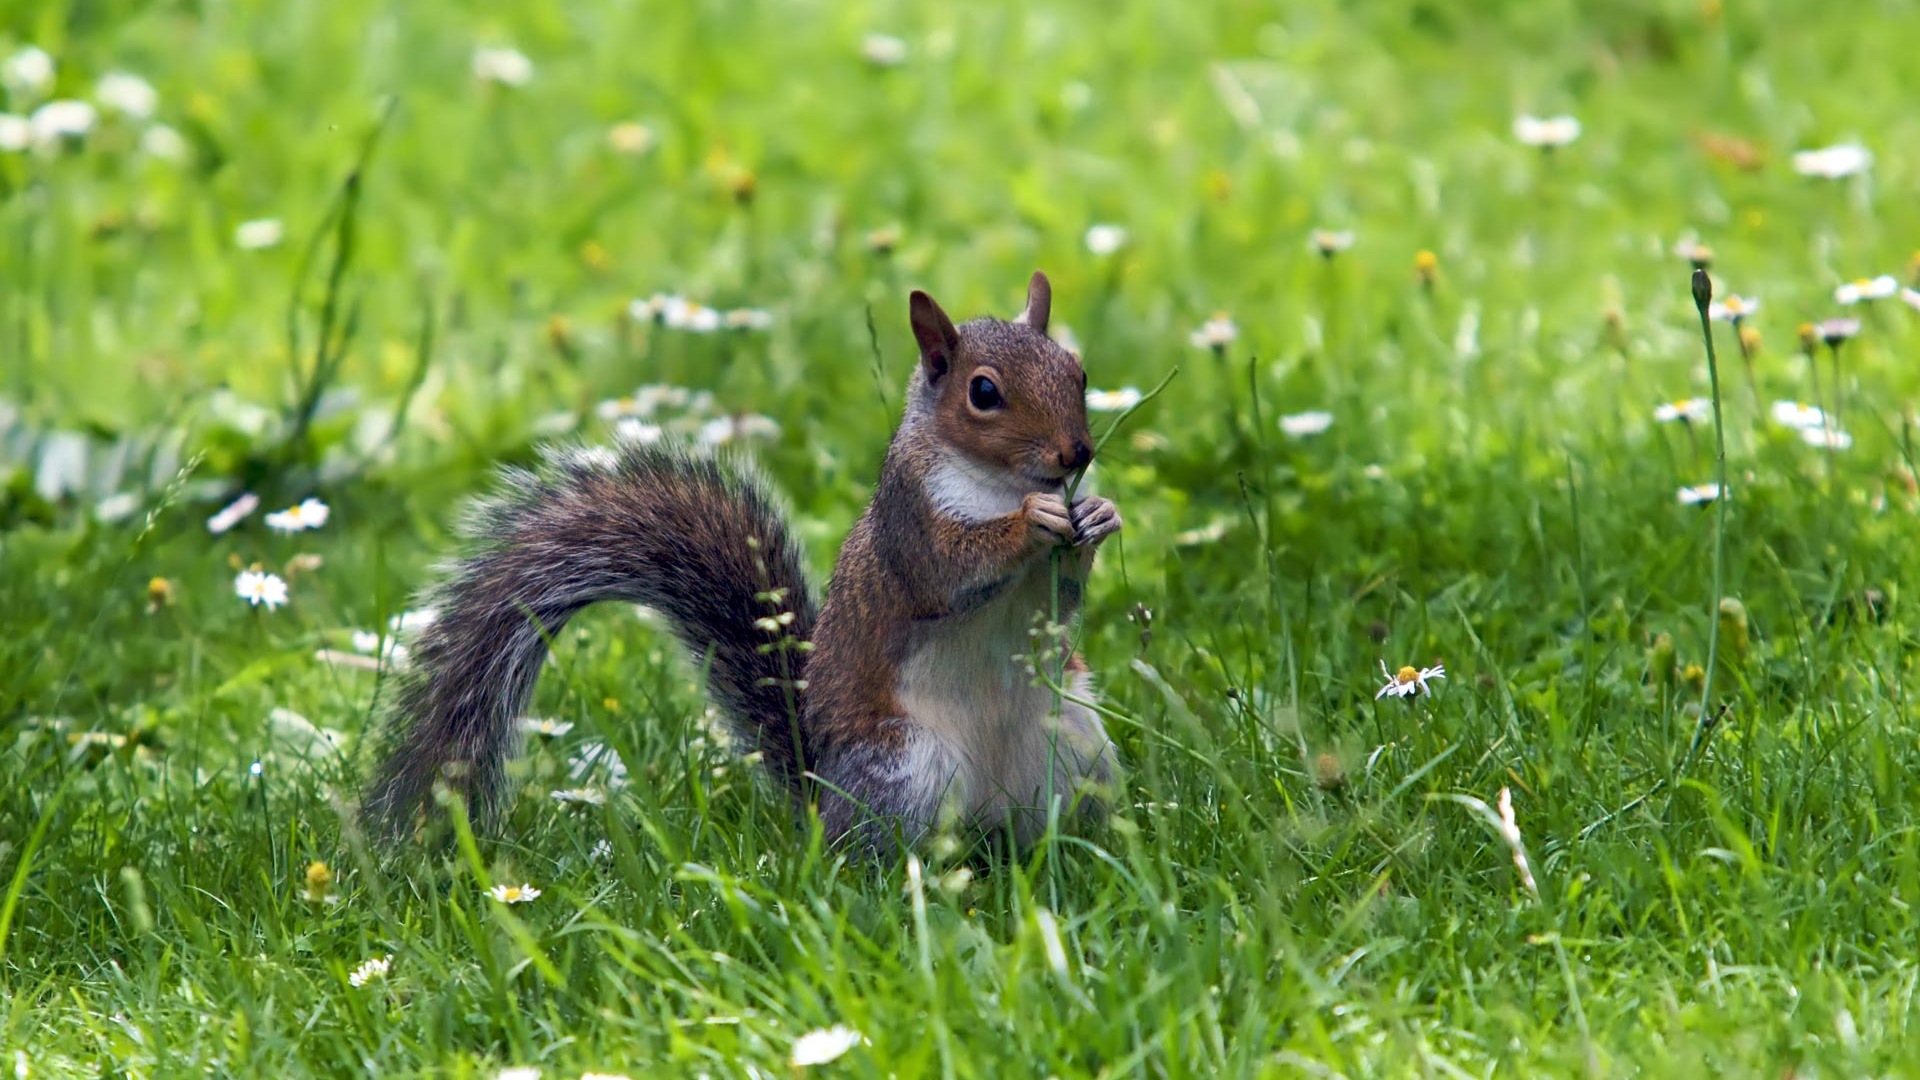 Animal close-up, cute squirrel HD wallpapers #18 - 1920x1080